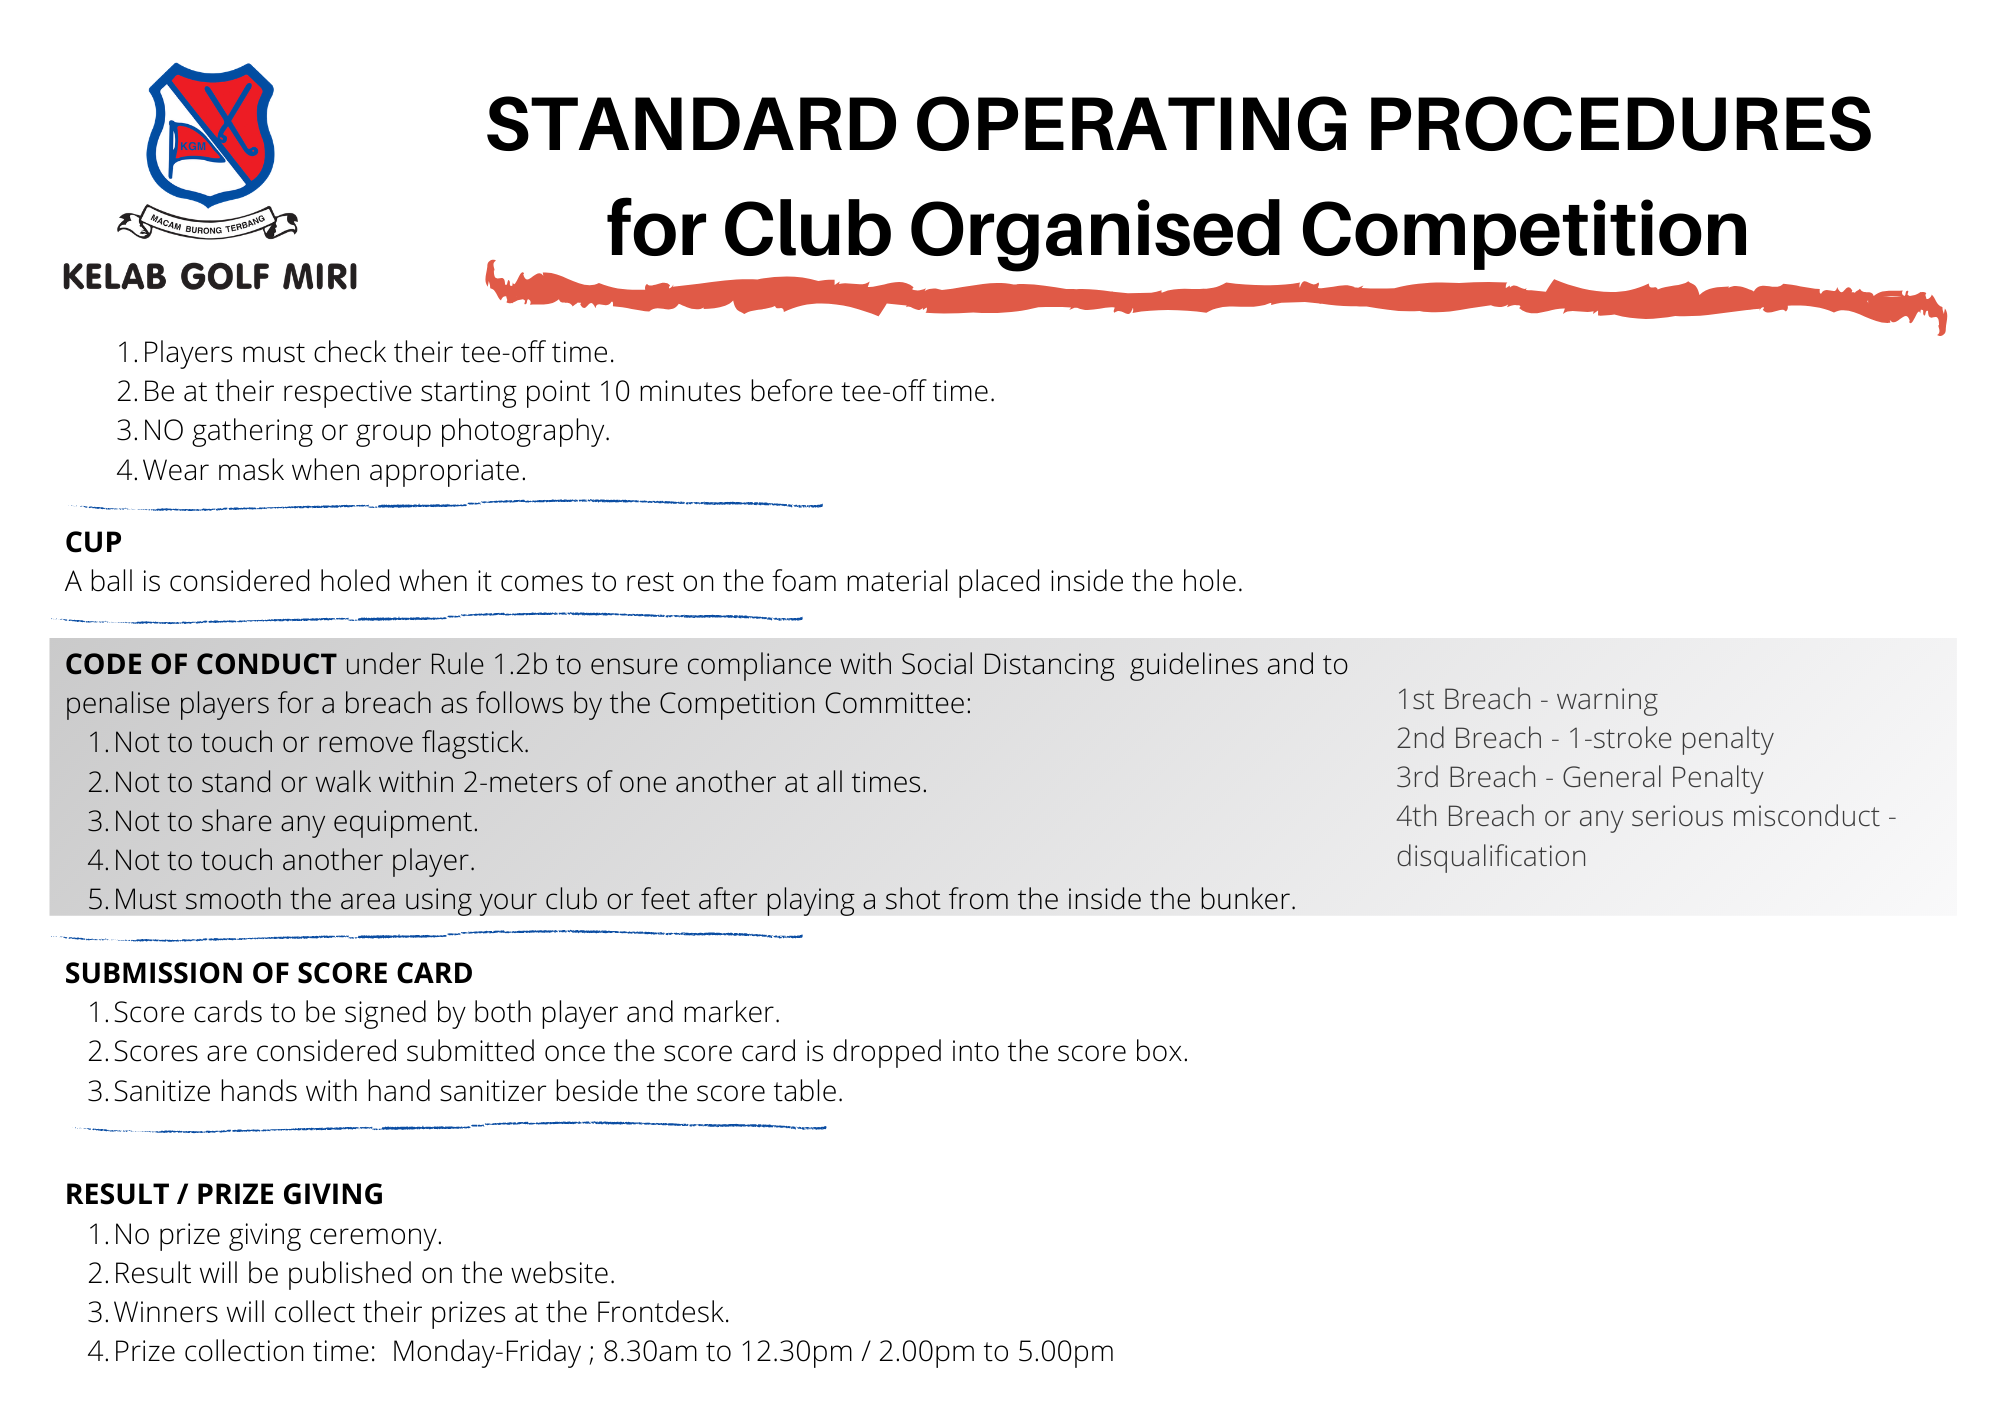 STANDARD OPERATING PROCEDURES for Club Organised Competition - FINAL